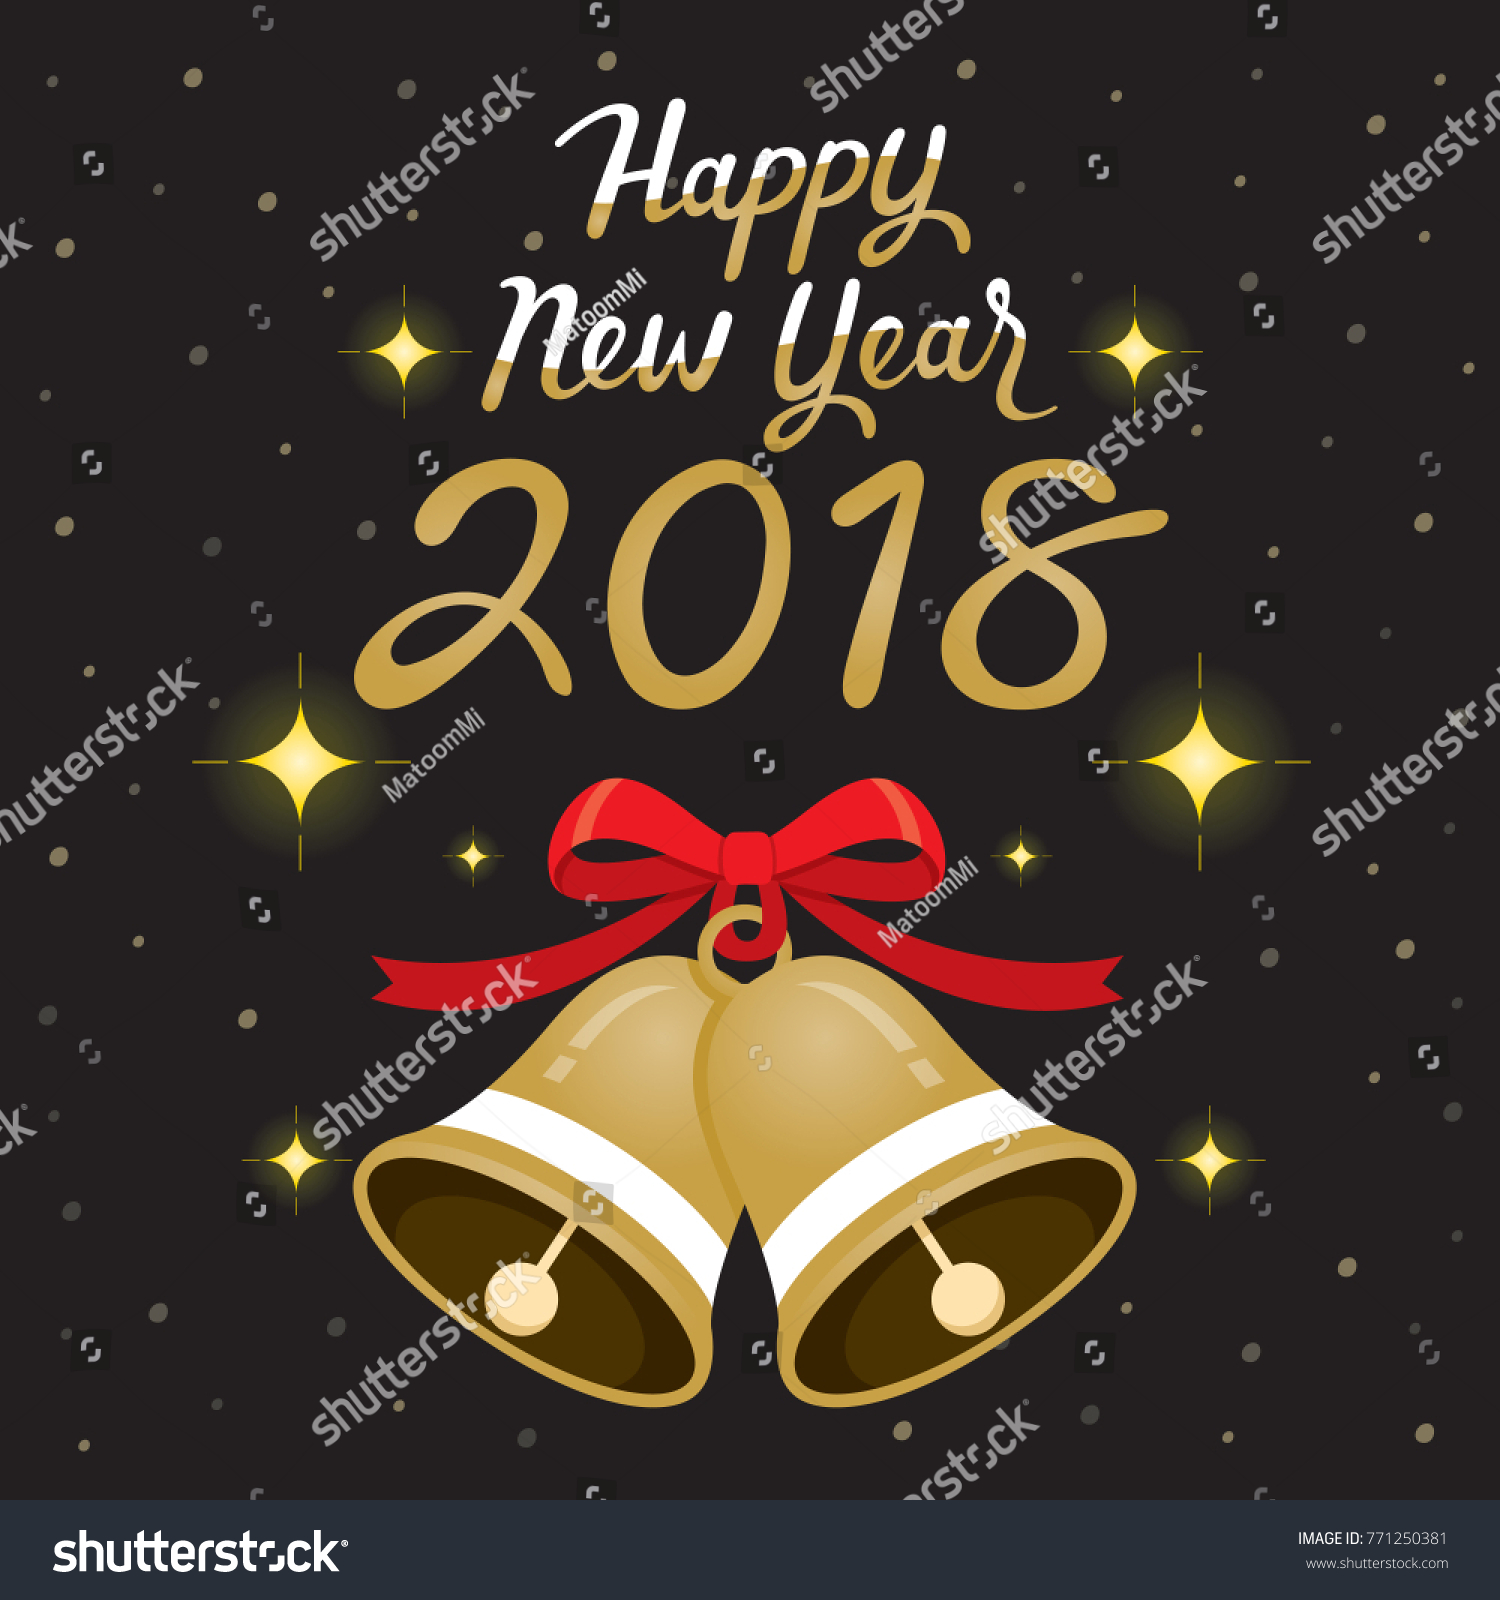 New Year 2018 Text With Bell Decorating Black background Merry Christmas Xmas